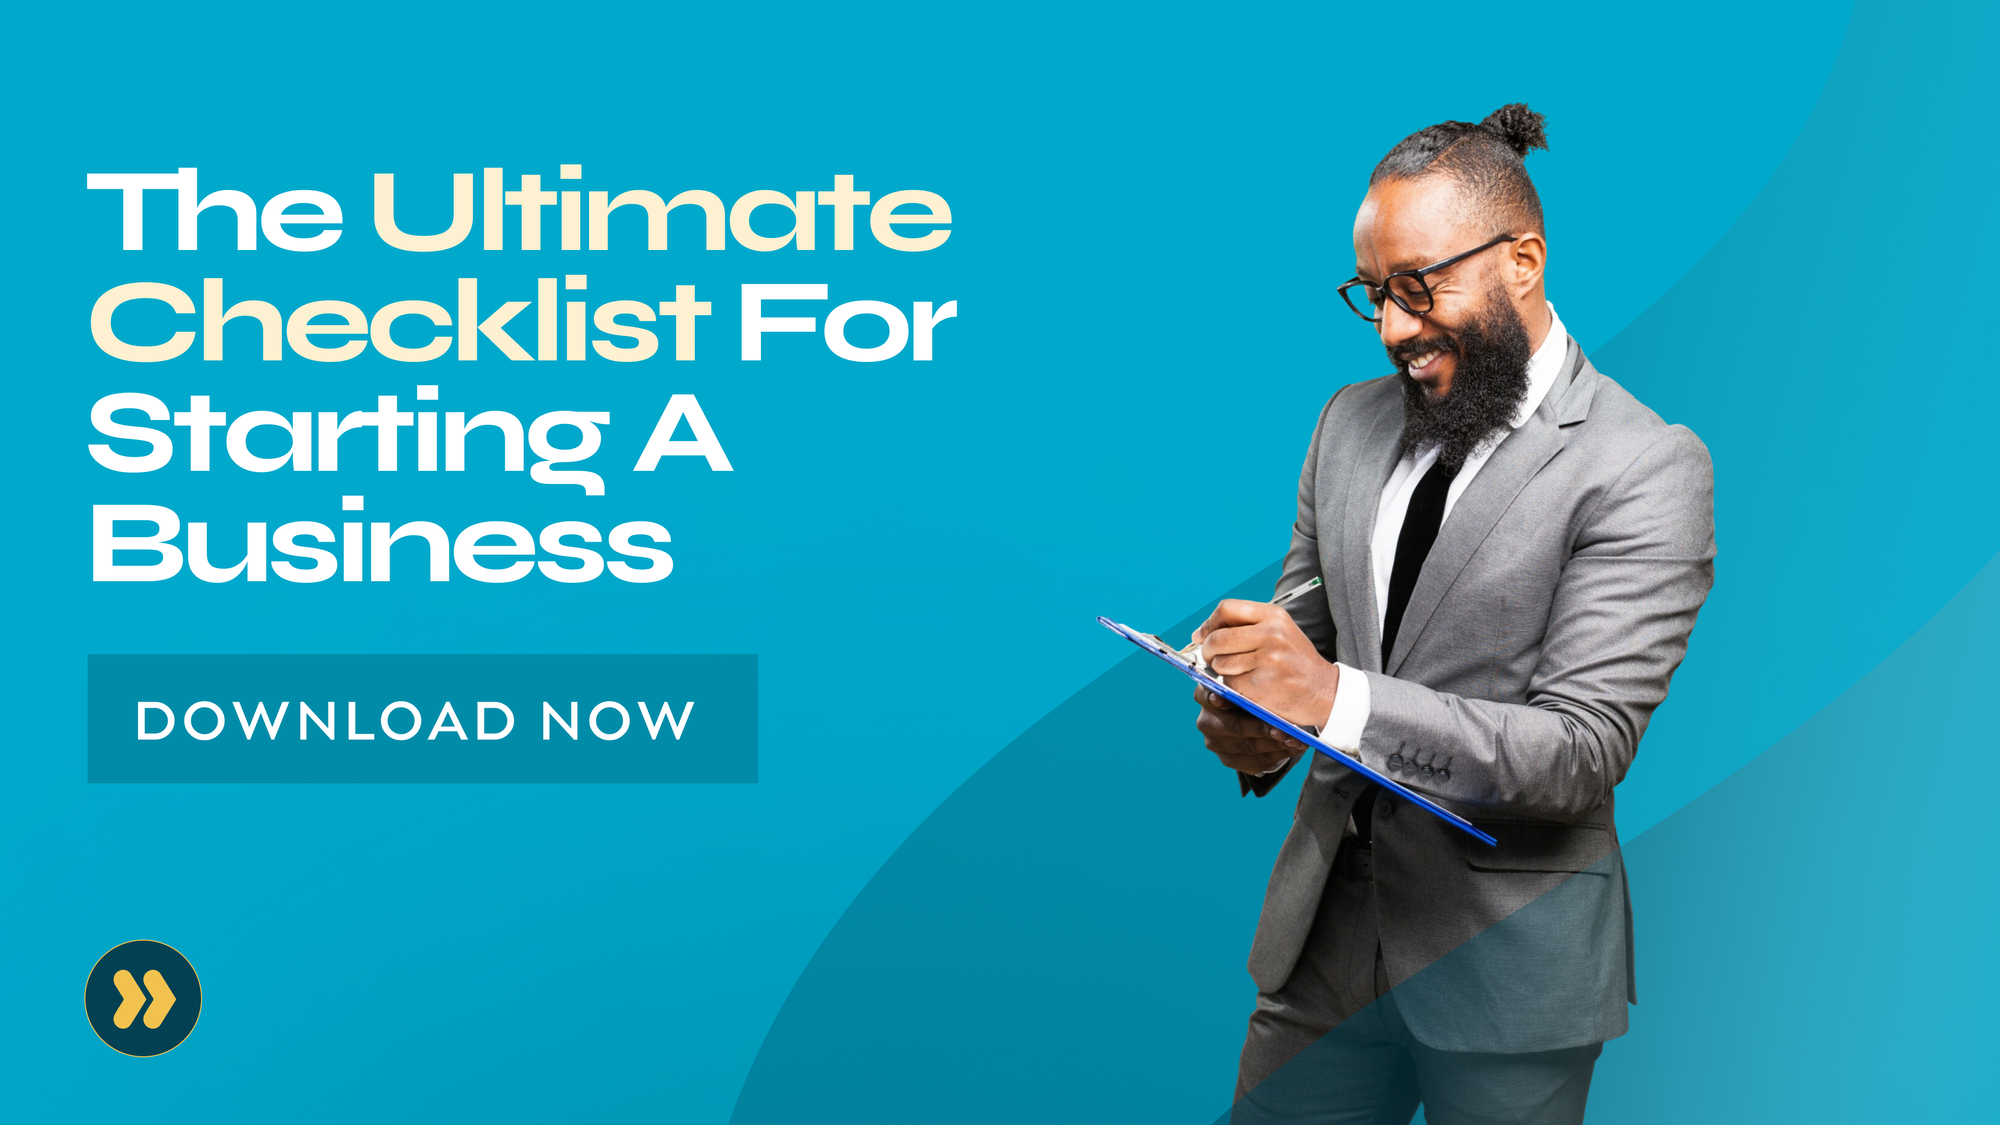 The Ultimate Checklist for Starting a Business